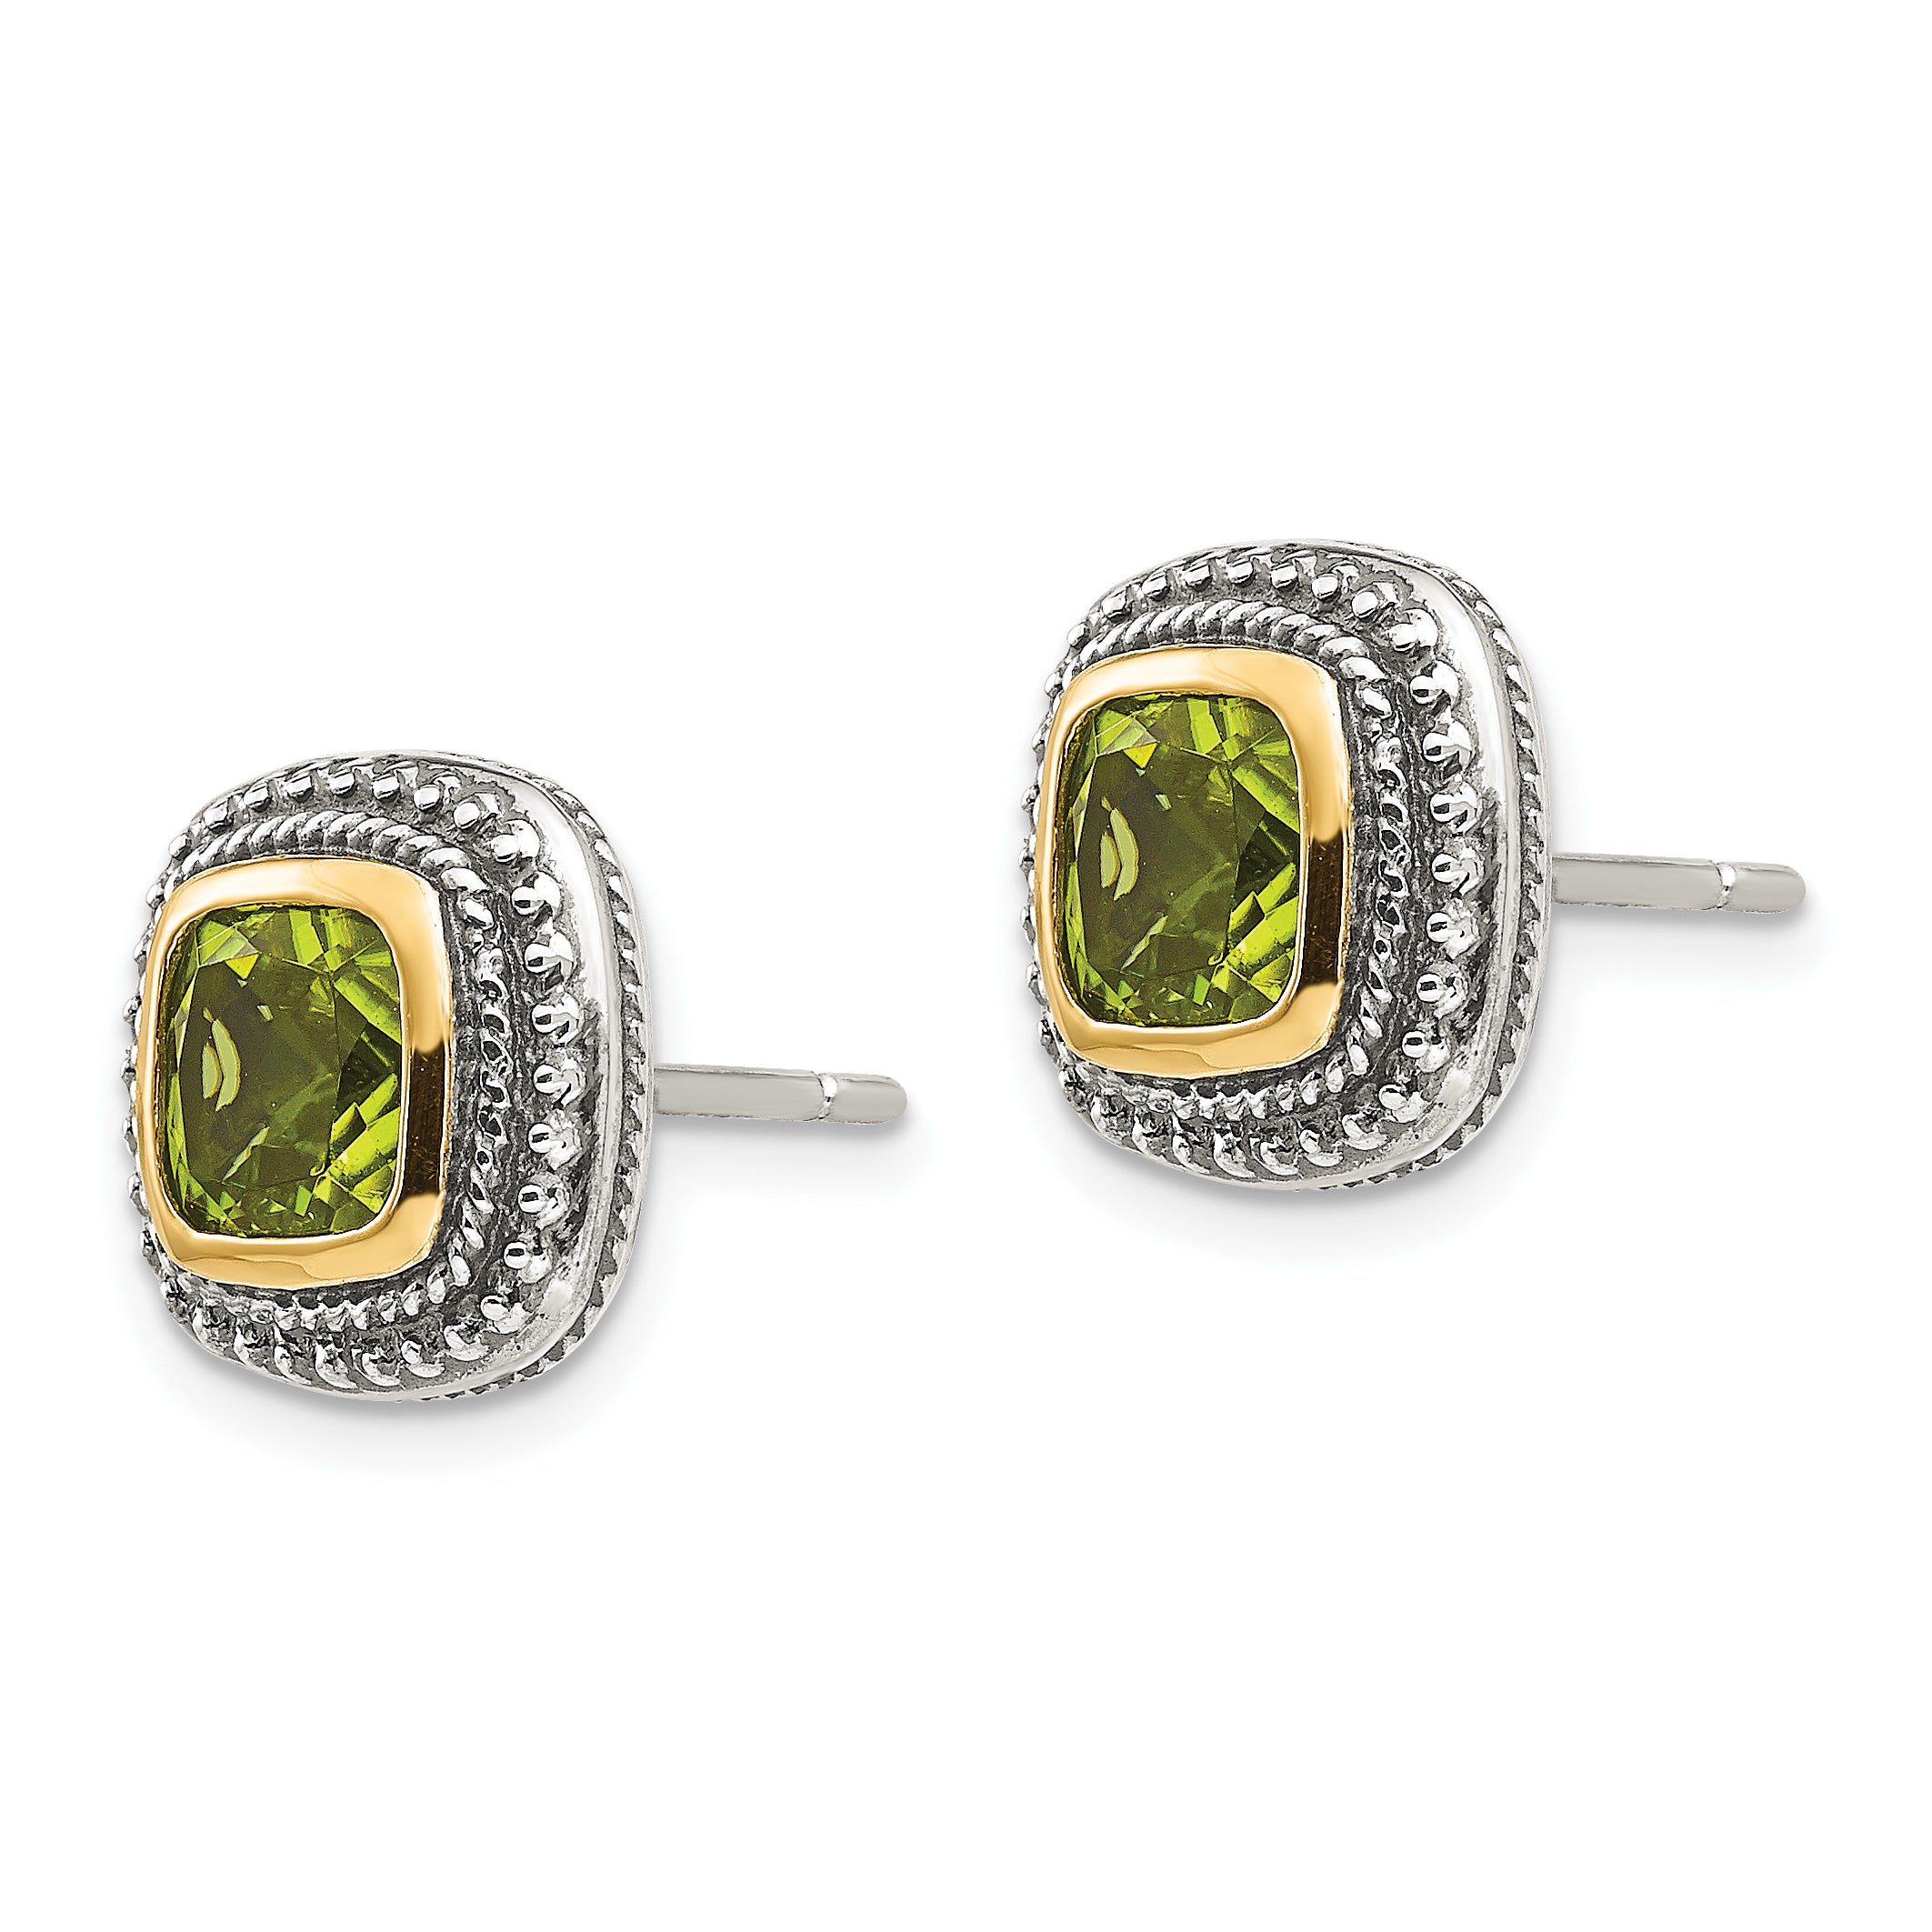 Shey Couture Sterling Silver with 14K Accent Antiqued Cushion Bezel Peridot Post Earrings